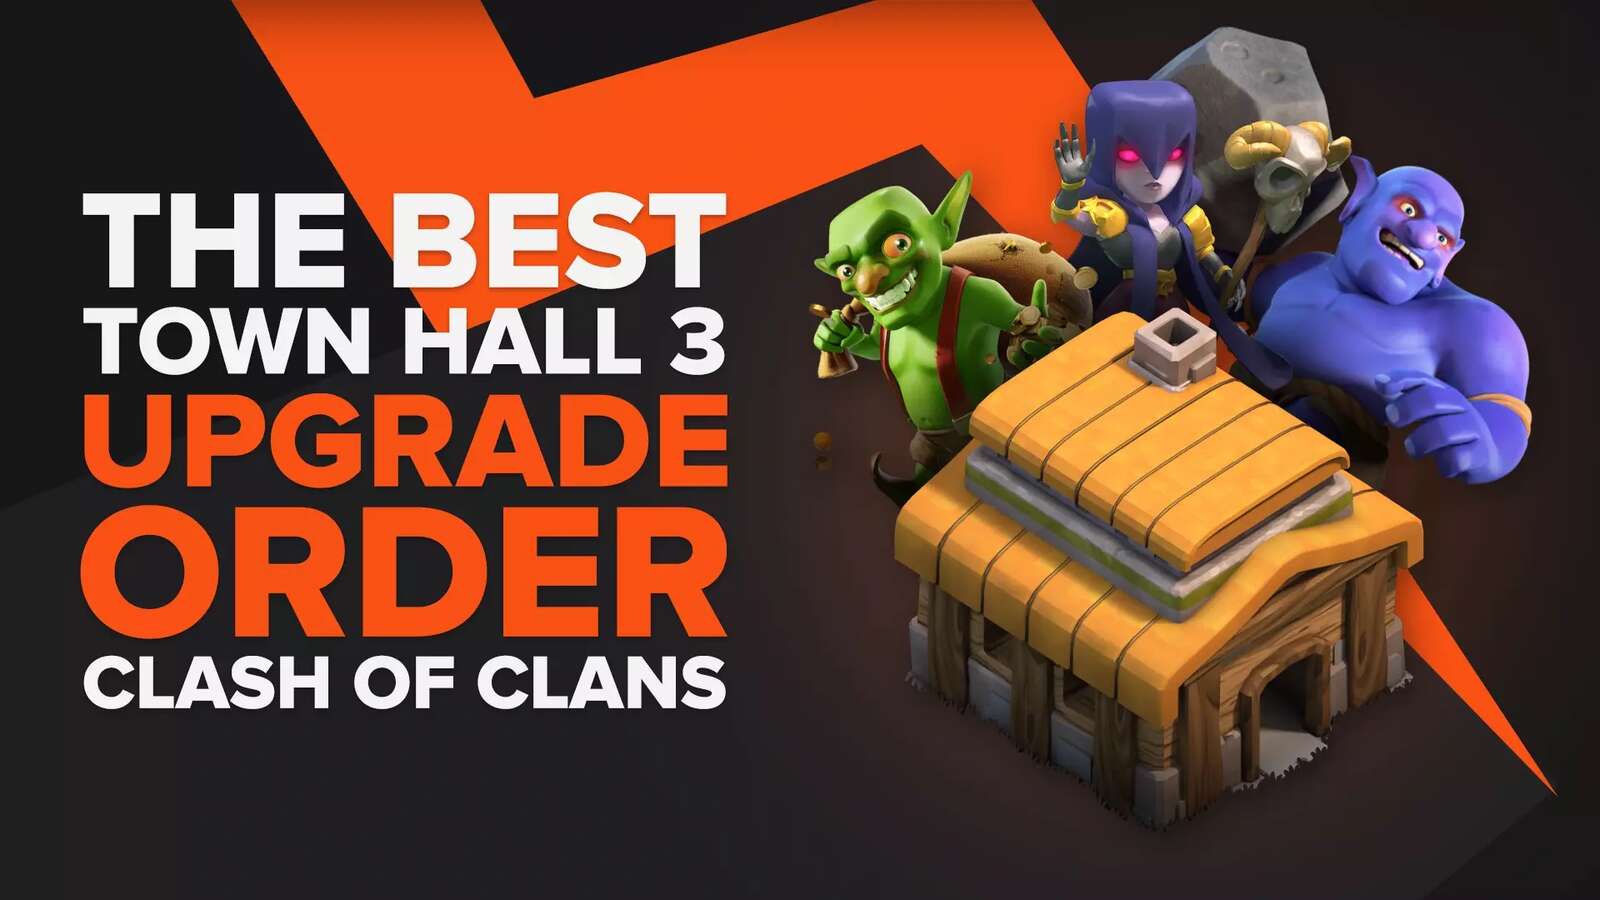 What Is The Best Upgrade Order For Town Hall 3 In Clash of Clans?